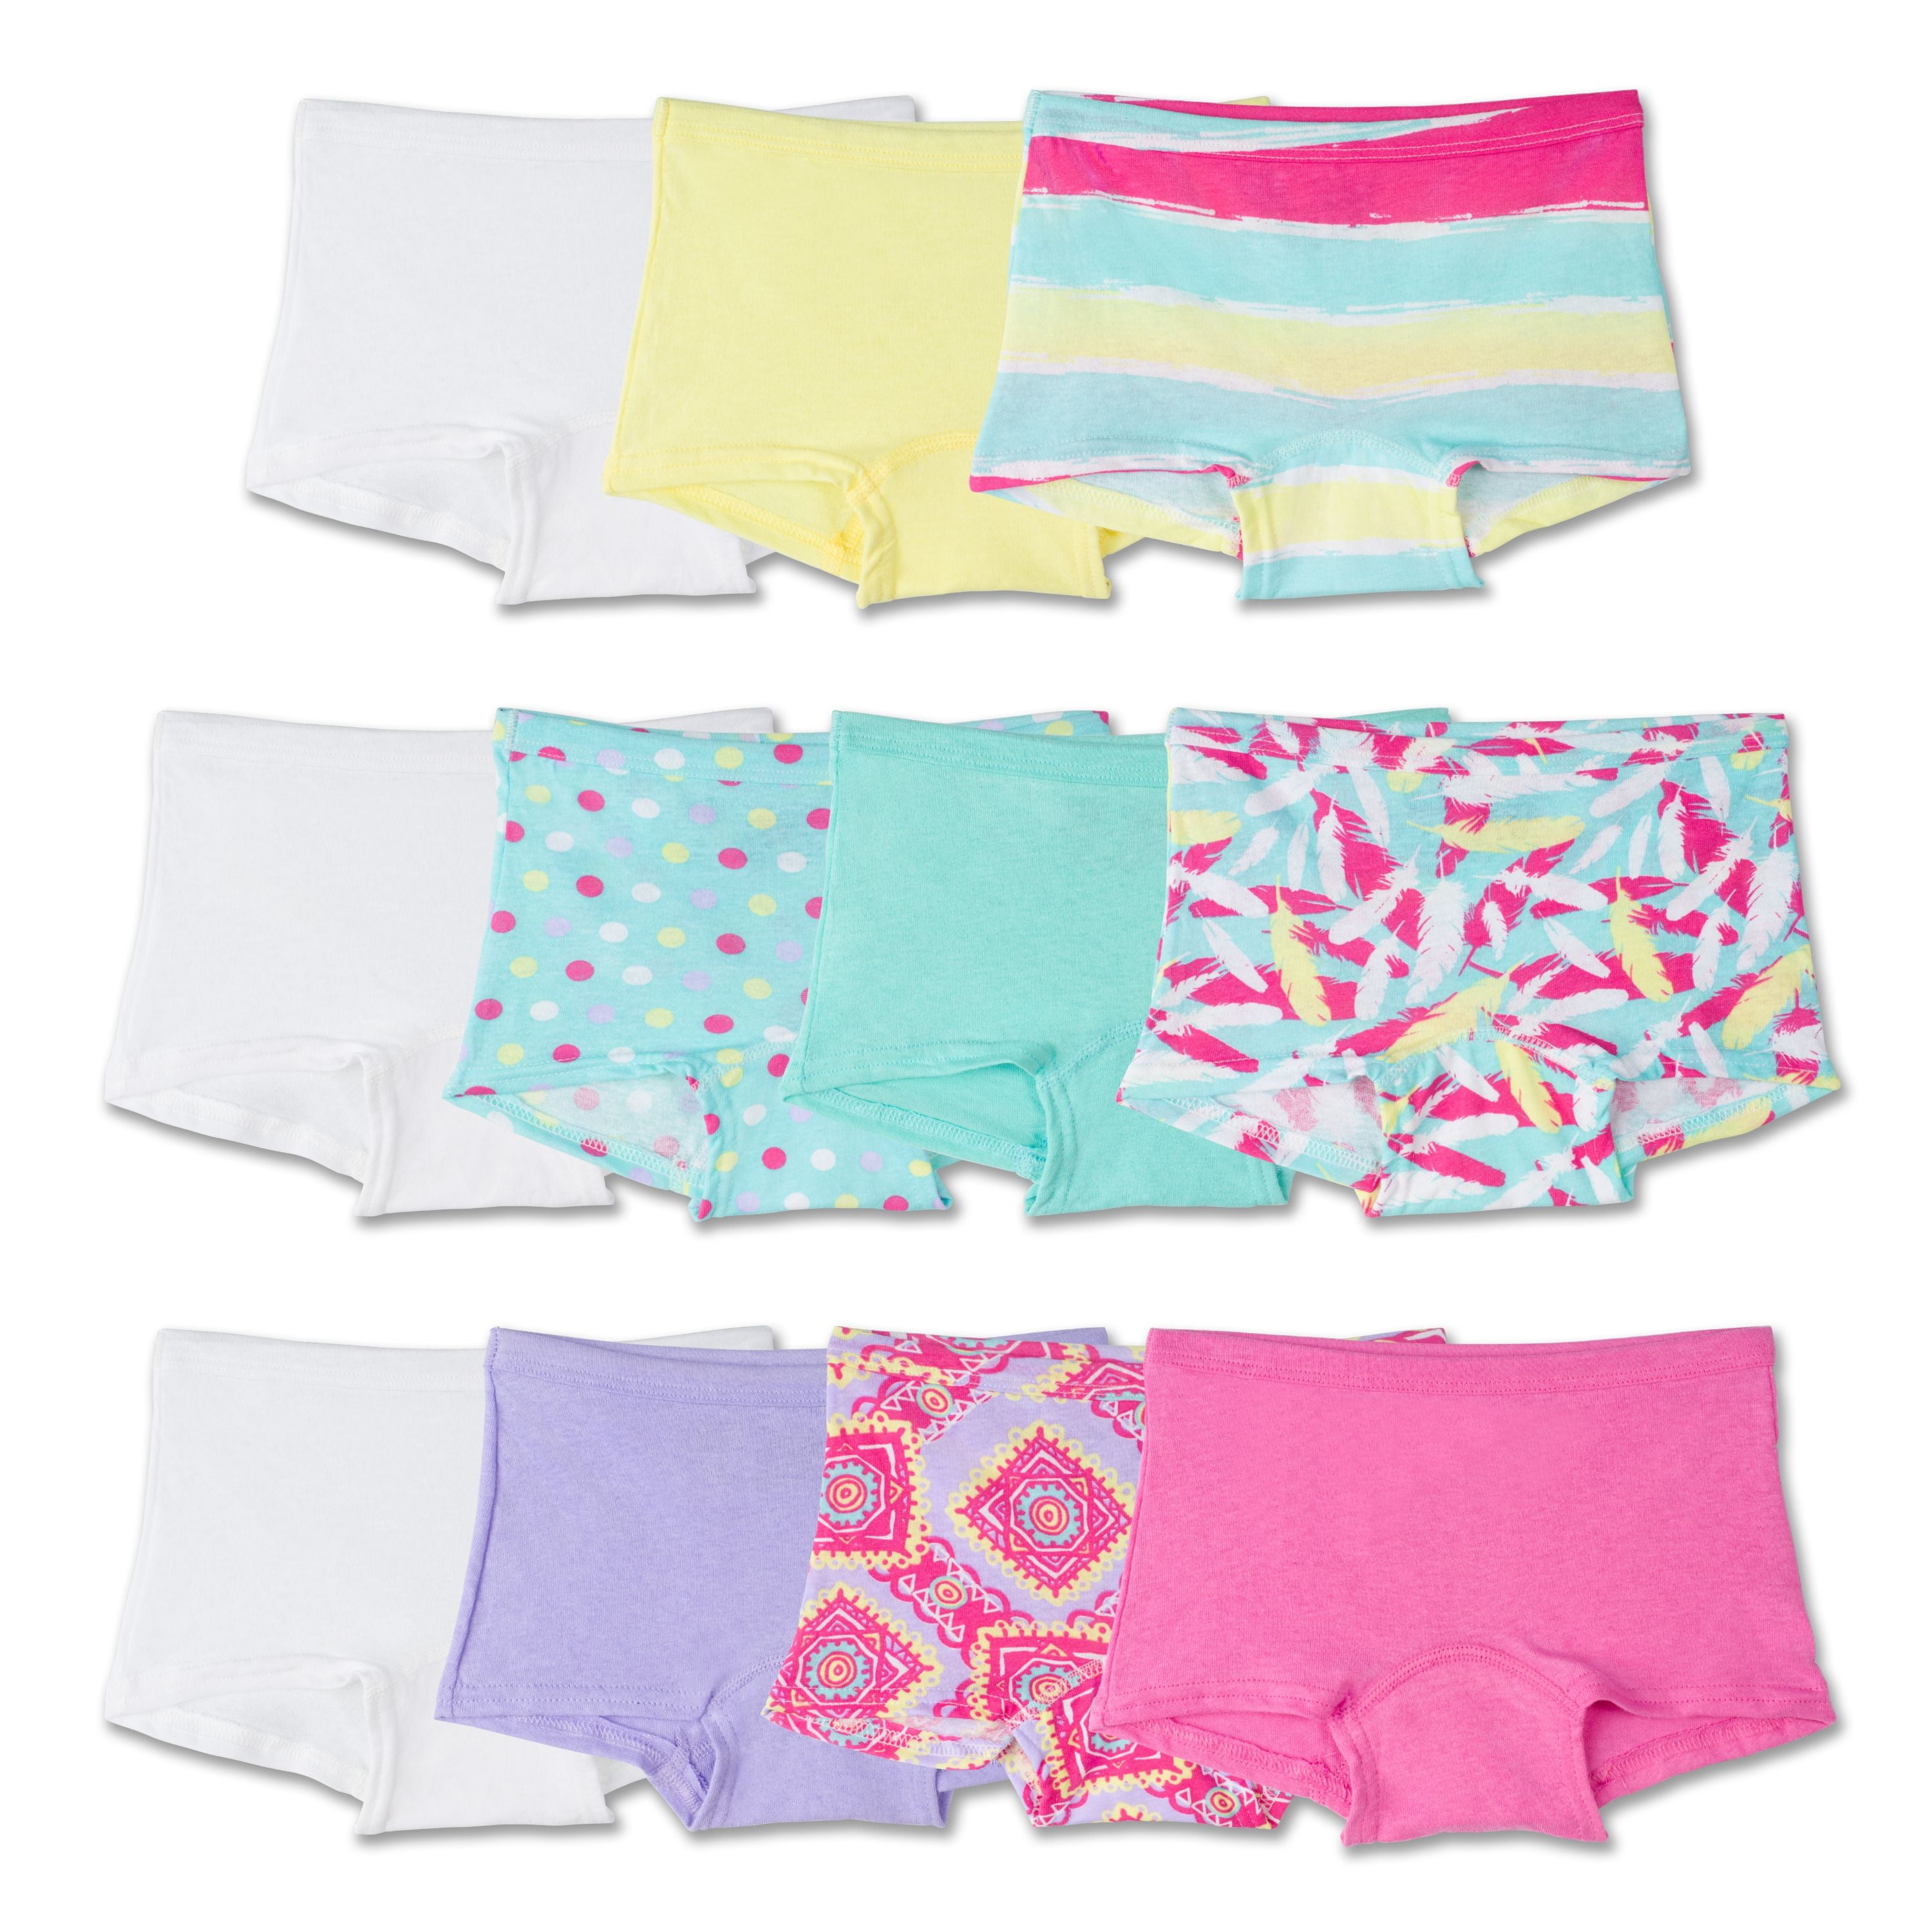 YoungSoul Girls Knickers Boyshorts 6 Pack Cotton Underwear Boxers Briefs 2-13 Years 